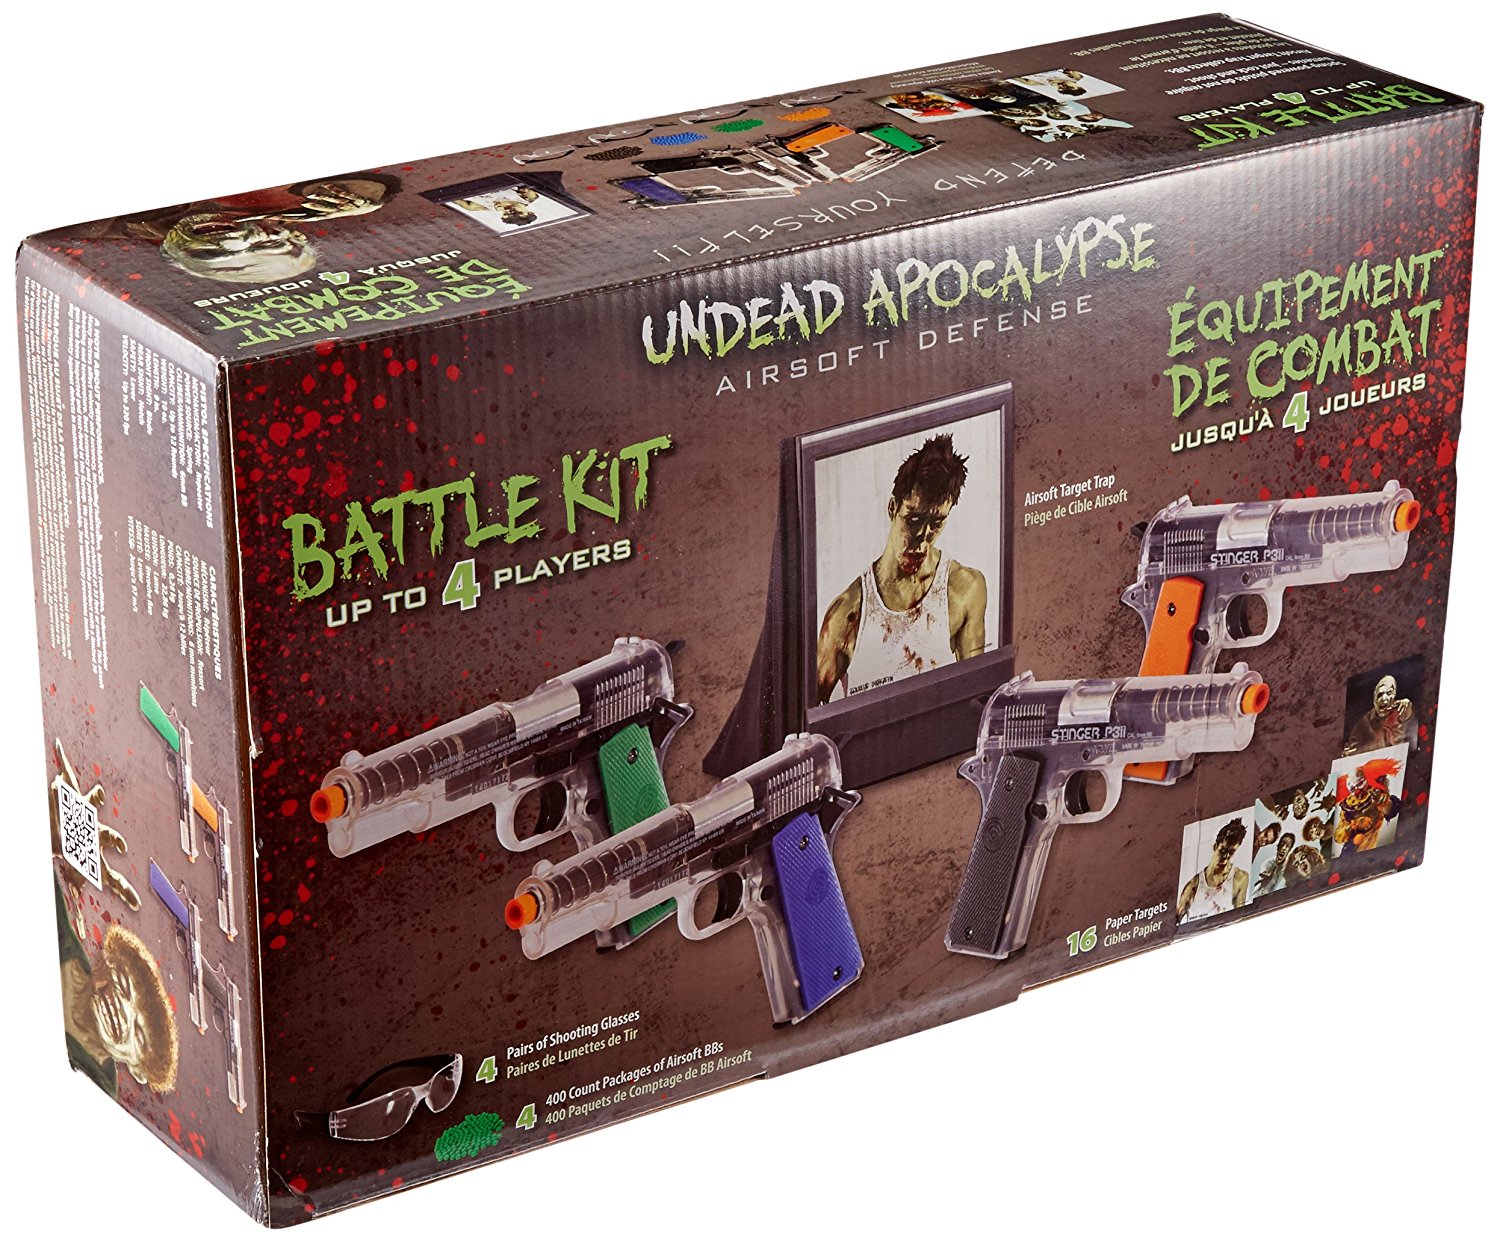 Undead Apocalypse Zombie Airsoft Gun Fun Kit – Includes 4 pistols and goggles! Just $12.34!